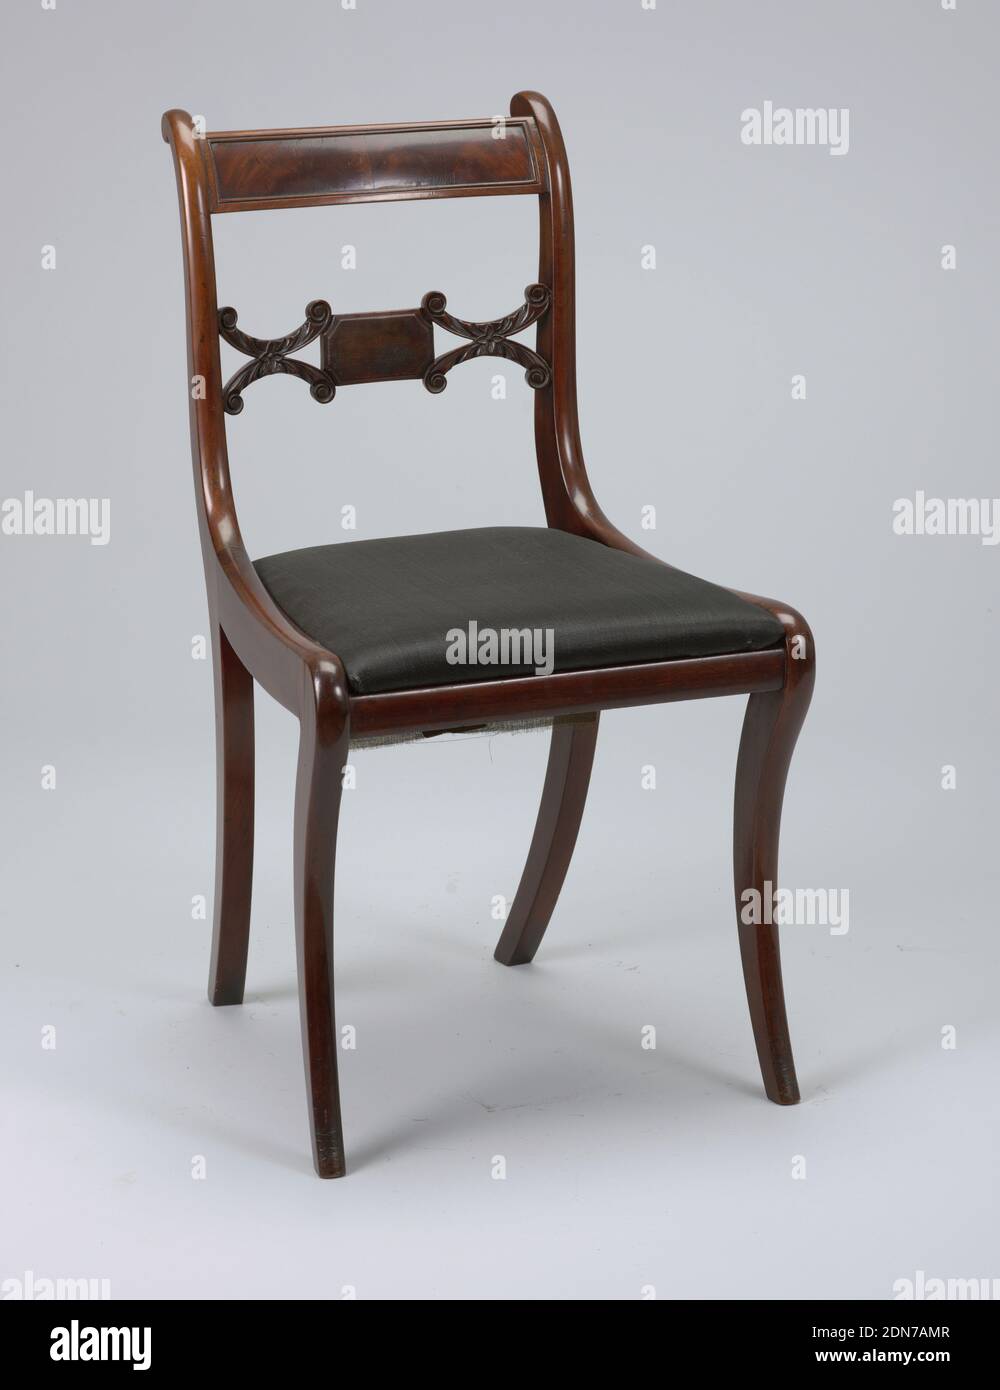 Side chair and slip seat, mahogany,poplar,horse hair, Back legs flat-sided, front legs flat excepting rounded front face; legs curve outward toward bottom, and back legs incline toward each other at bottom. The chair's back corner posts terminate in a volute-like form at the top of the chair. The chair's top rail, slightly arched, is bowed towards the back. A rectangular panel of inset veneer is surrounded by beading. The chair's splat is horizontal, composed of a small oblong-shaped rectangle faced with veneer, flanked on either side by horizontal coupled C-scrolls covered with foliage. Stock Photo